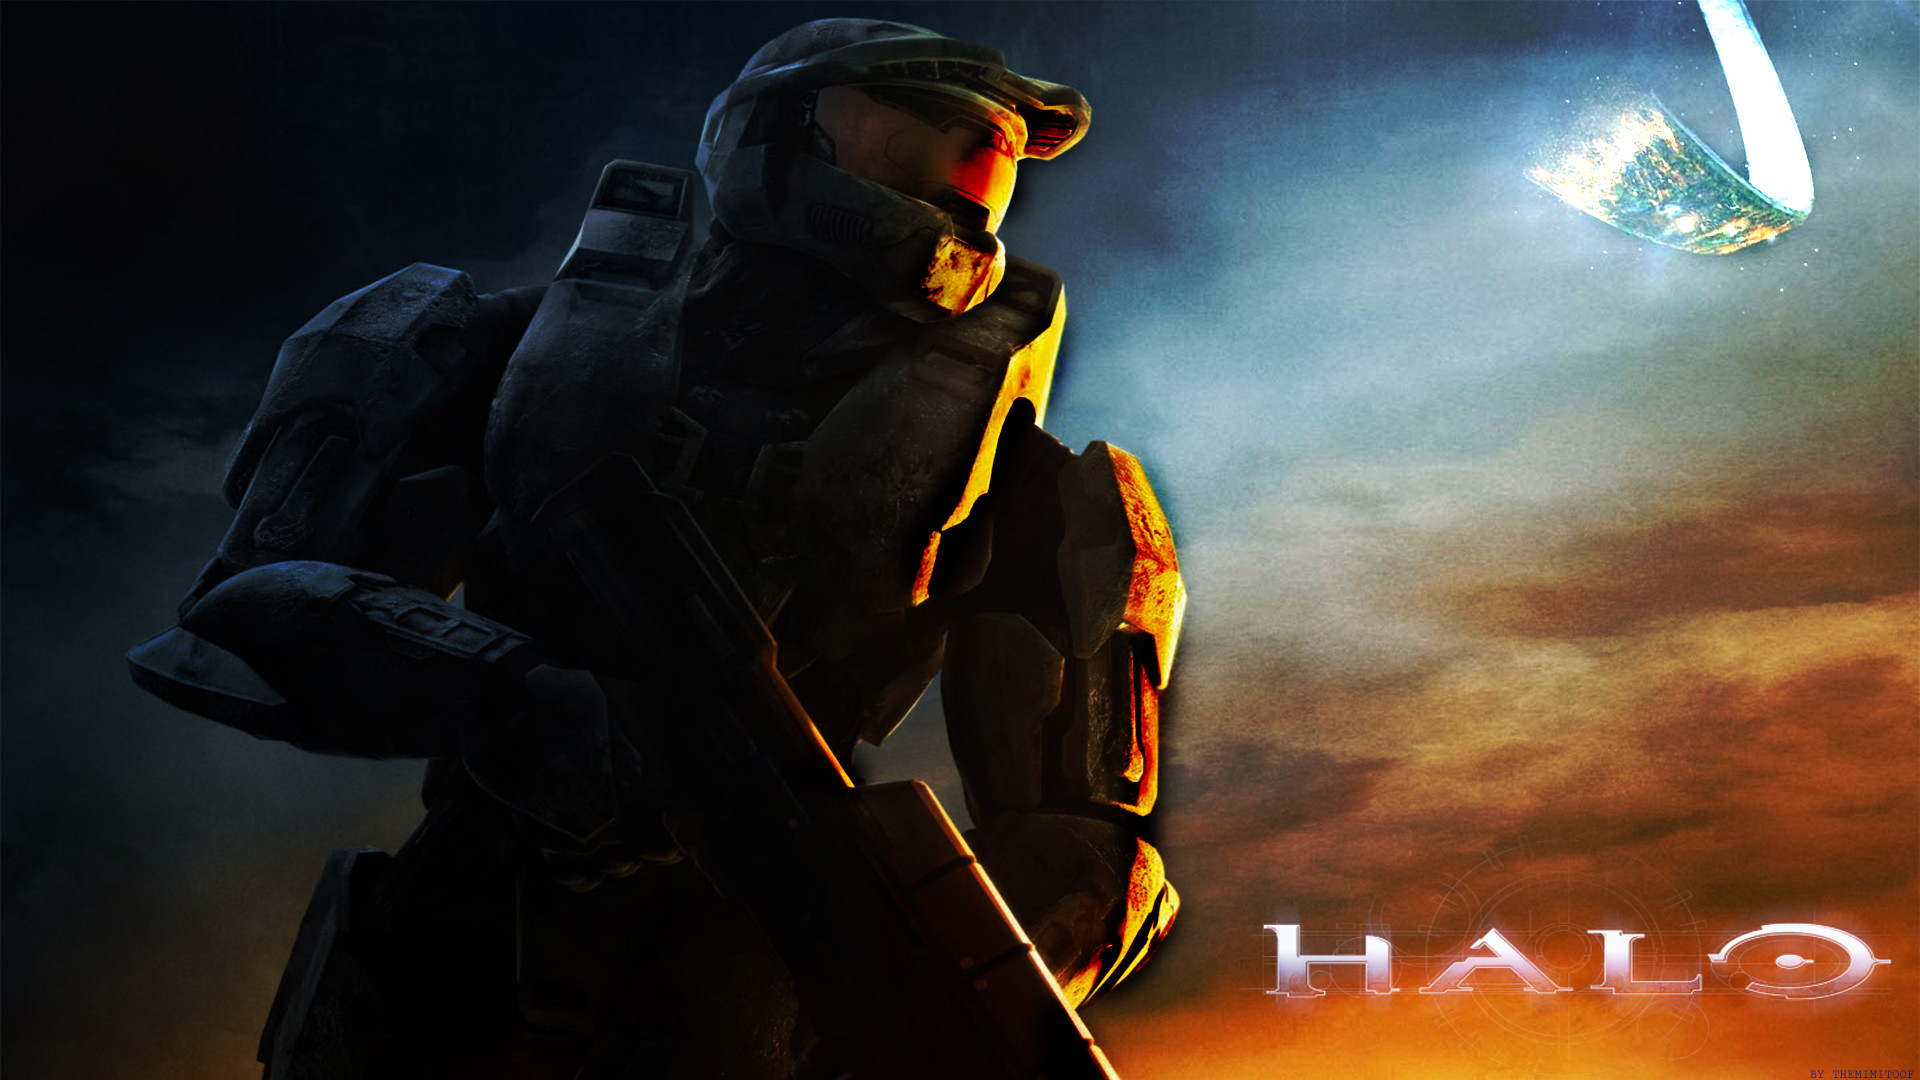 Halo 3 iPhone Wallpaper (71+ images)